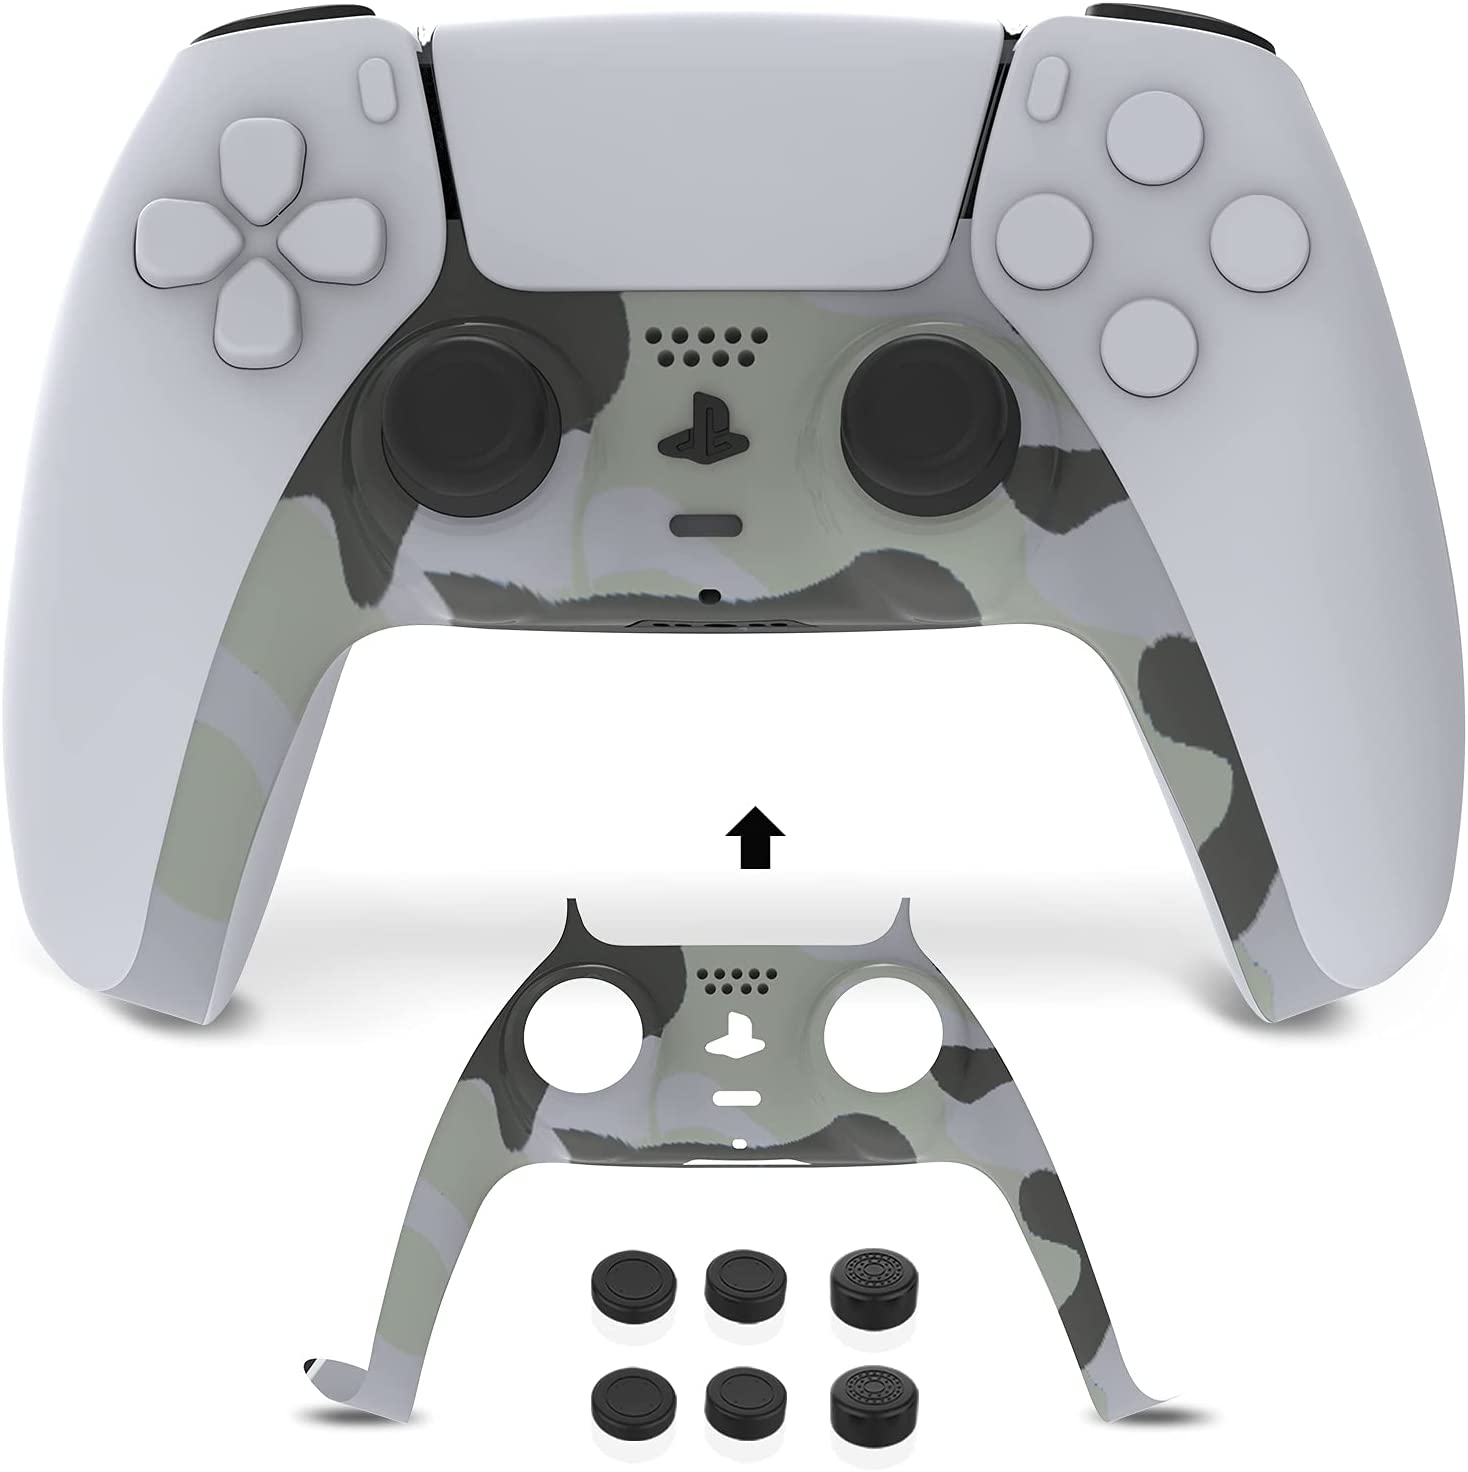 Silver camouflage PS5 controller faceplates are available, along with three pairs of replacement joystick caps.